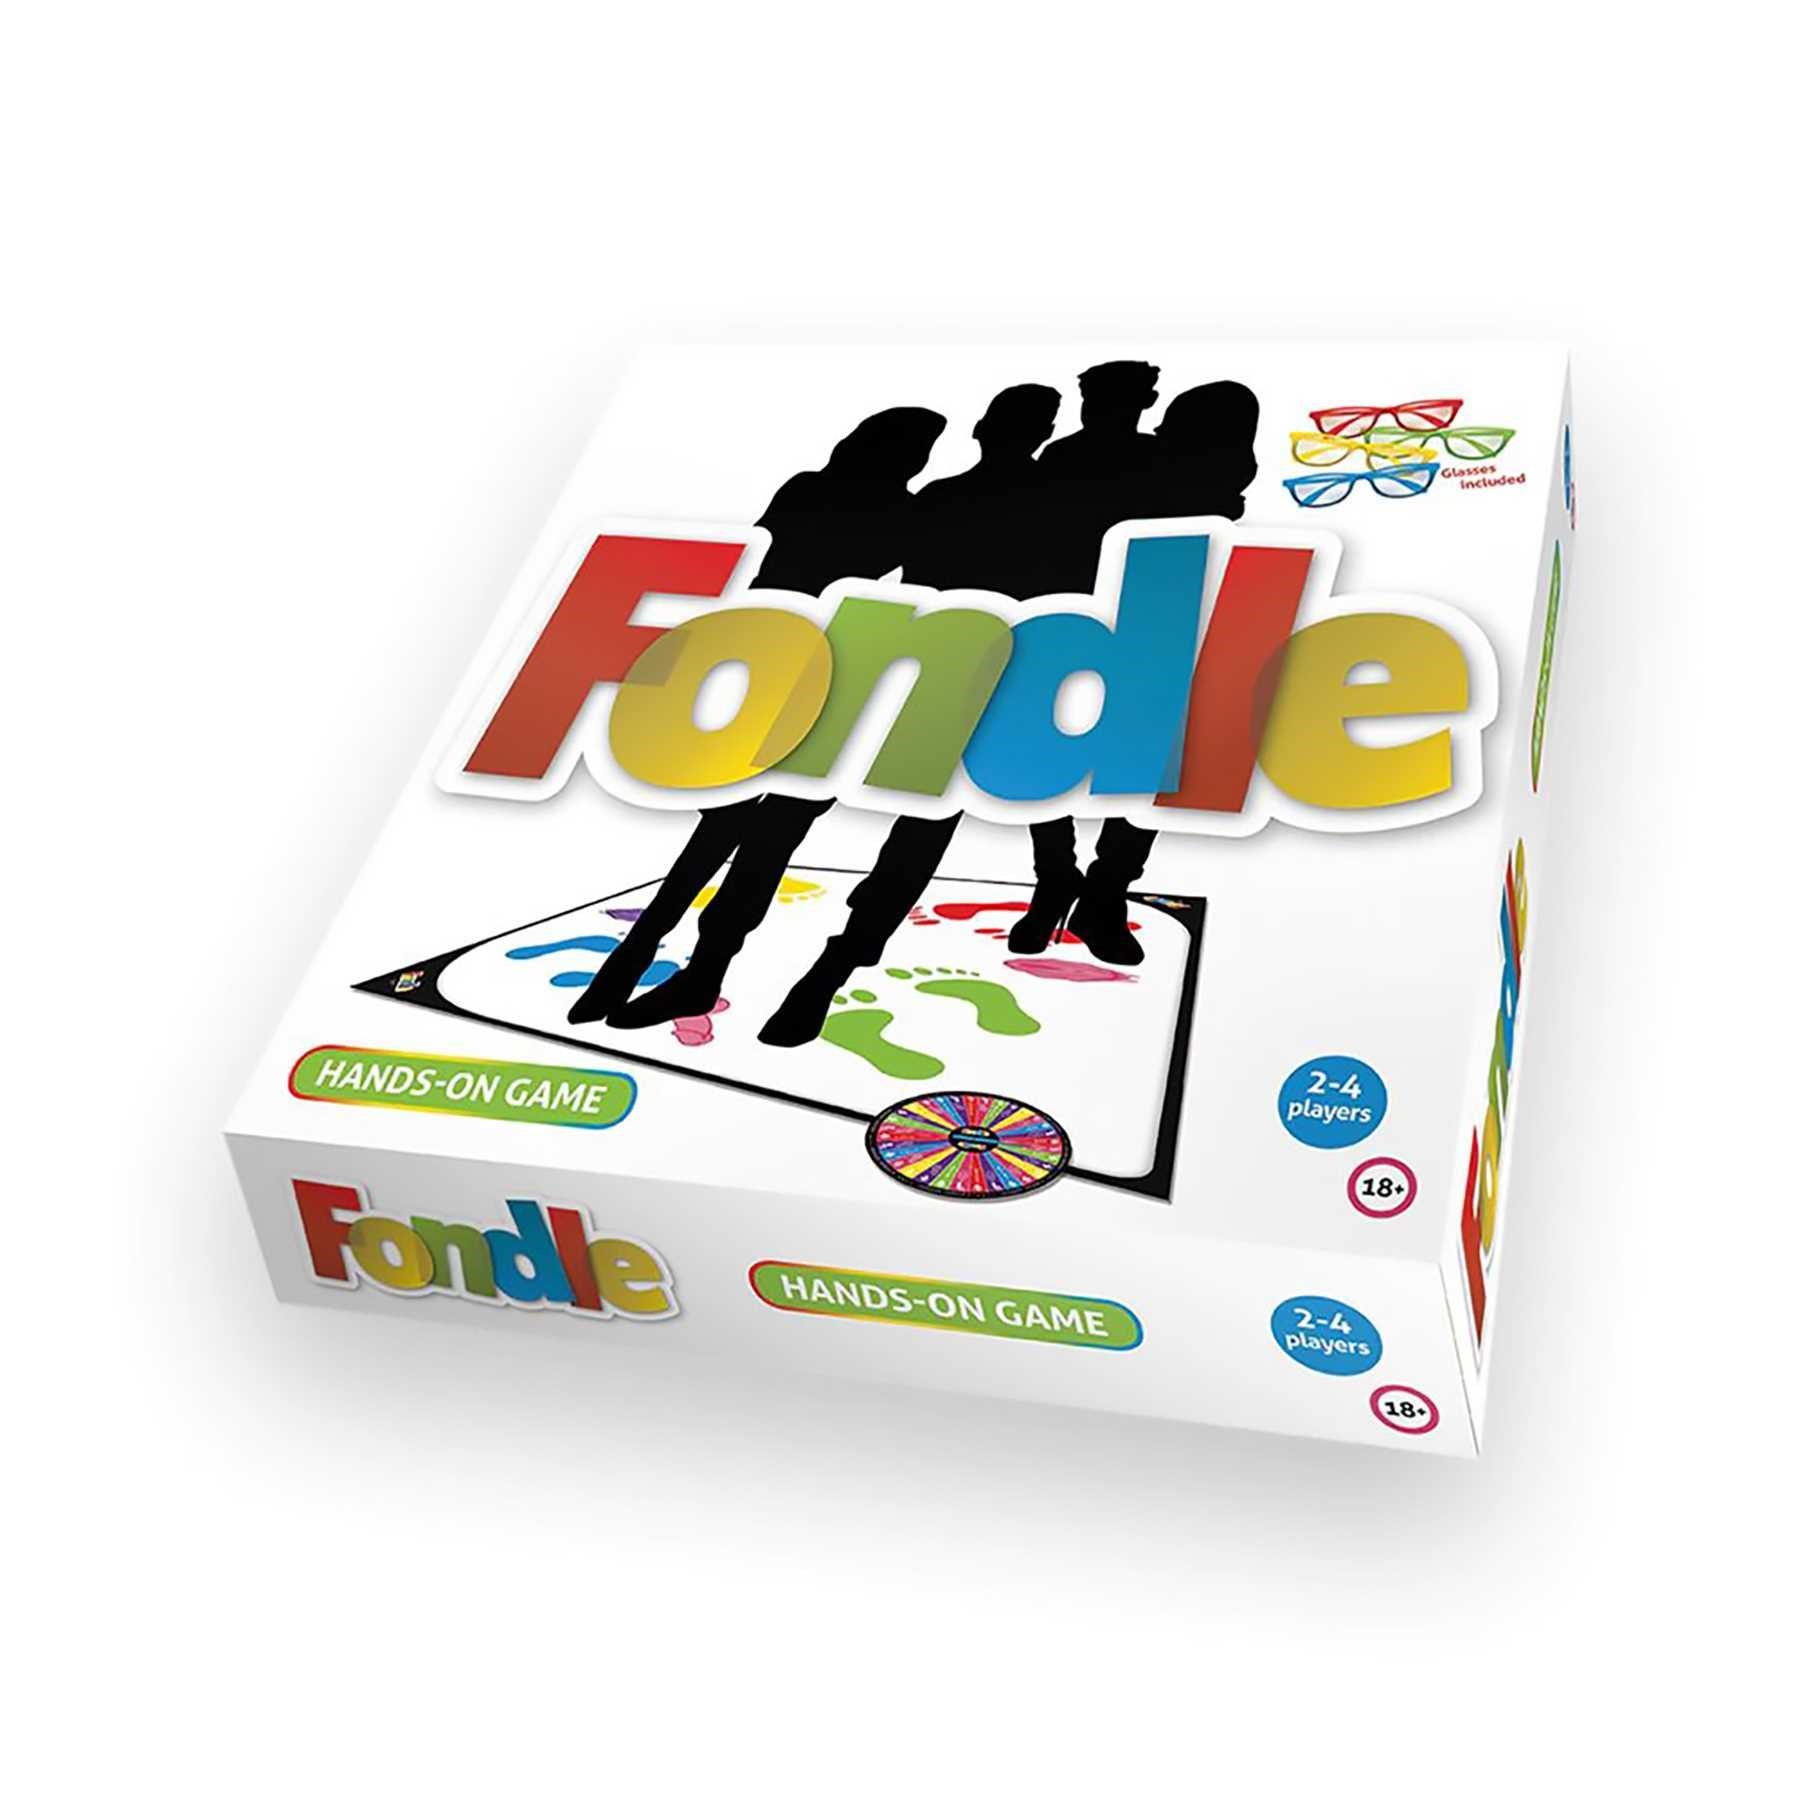 Fondle fruity hands on game box